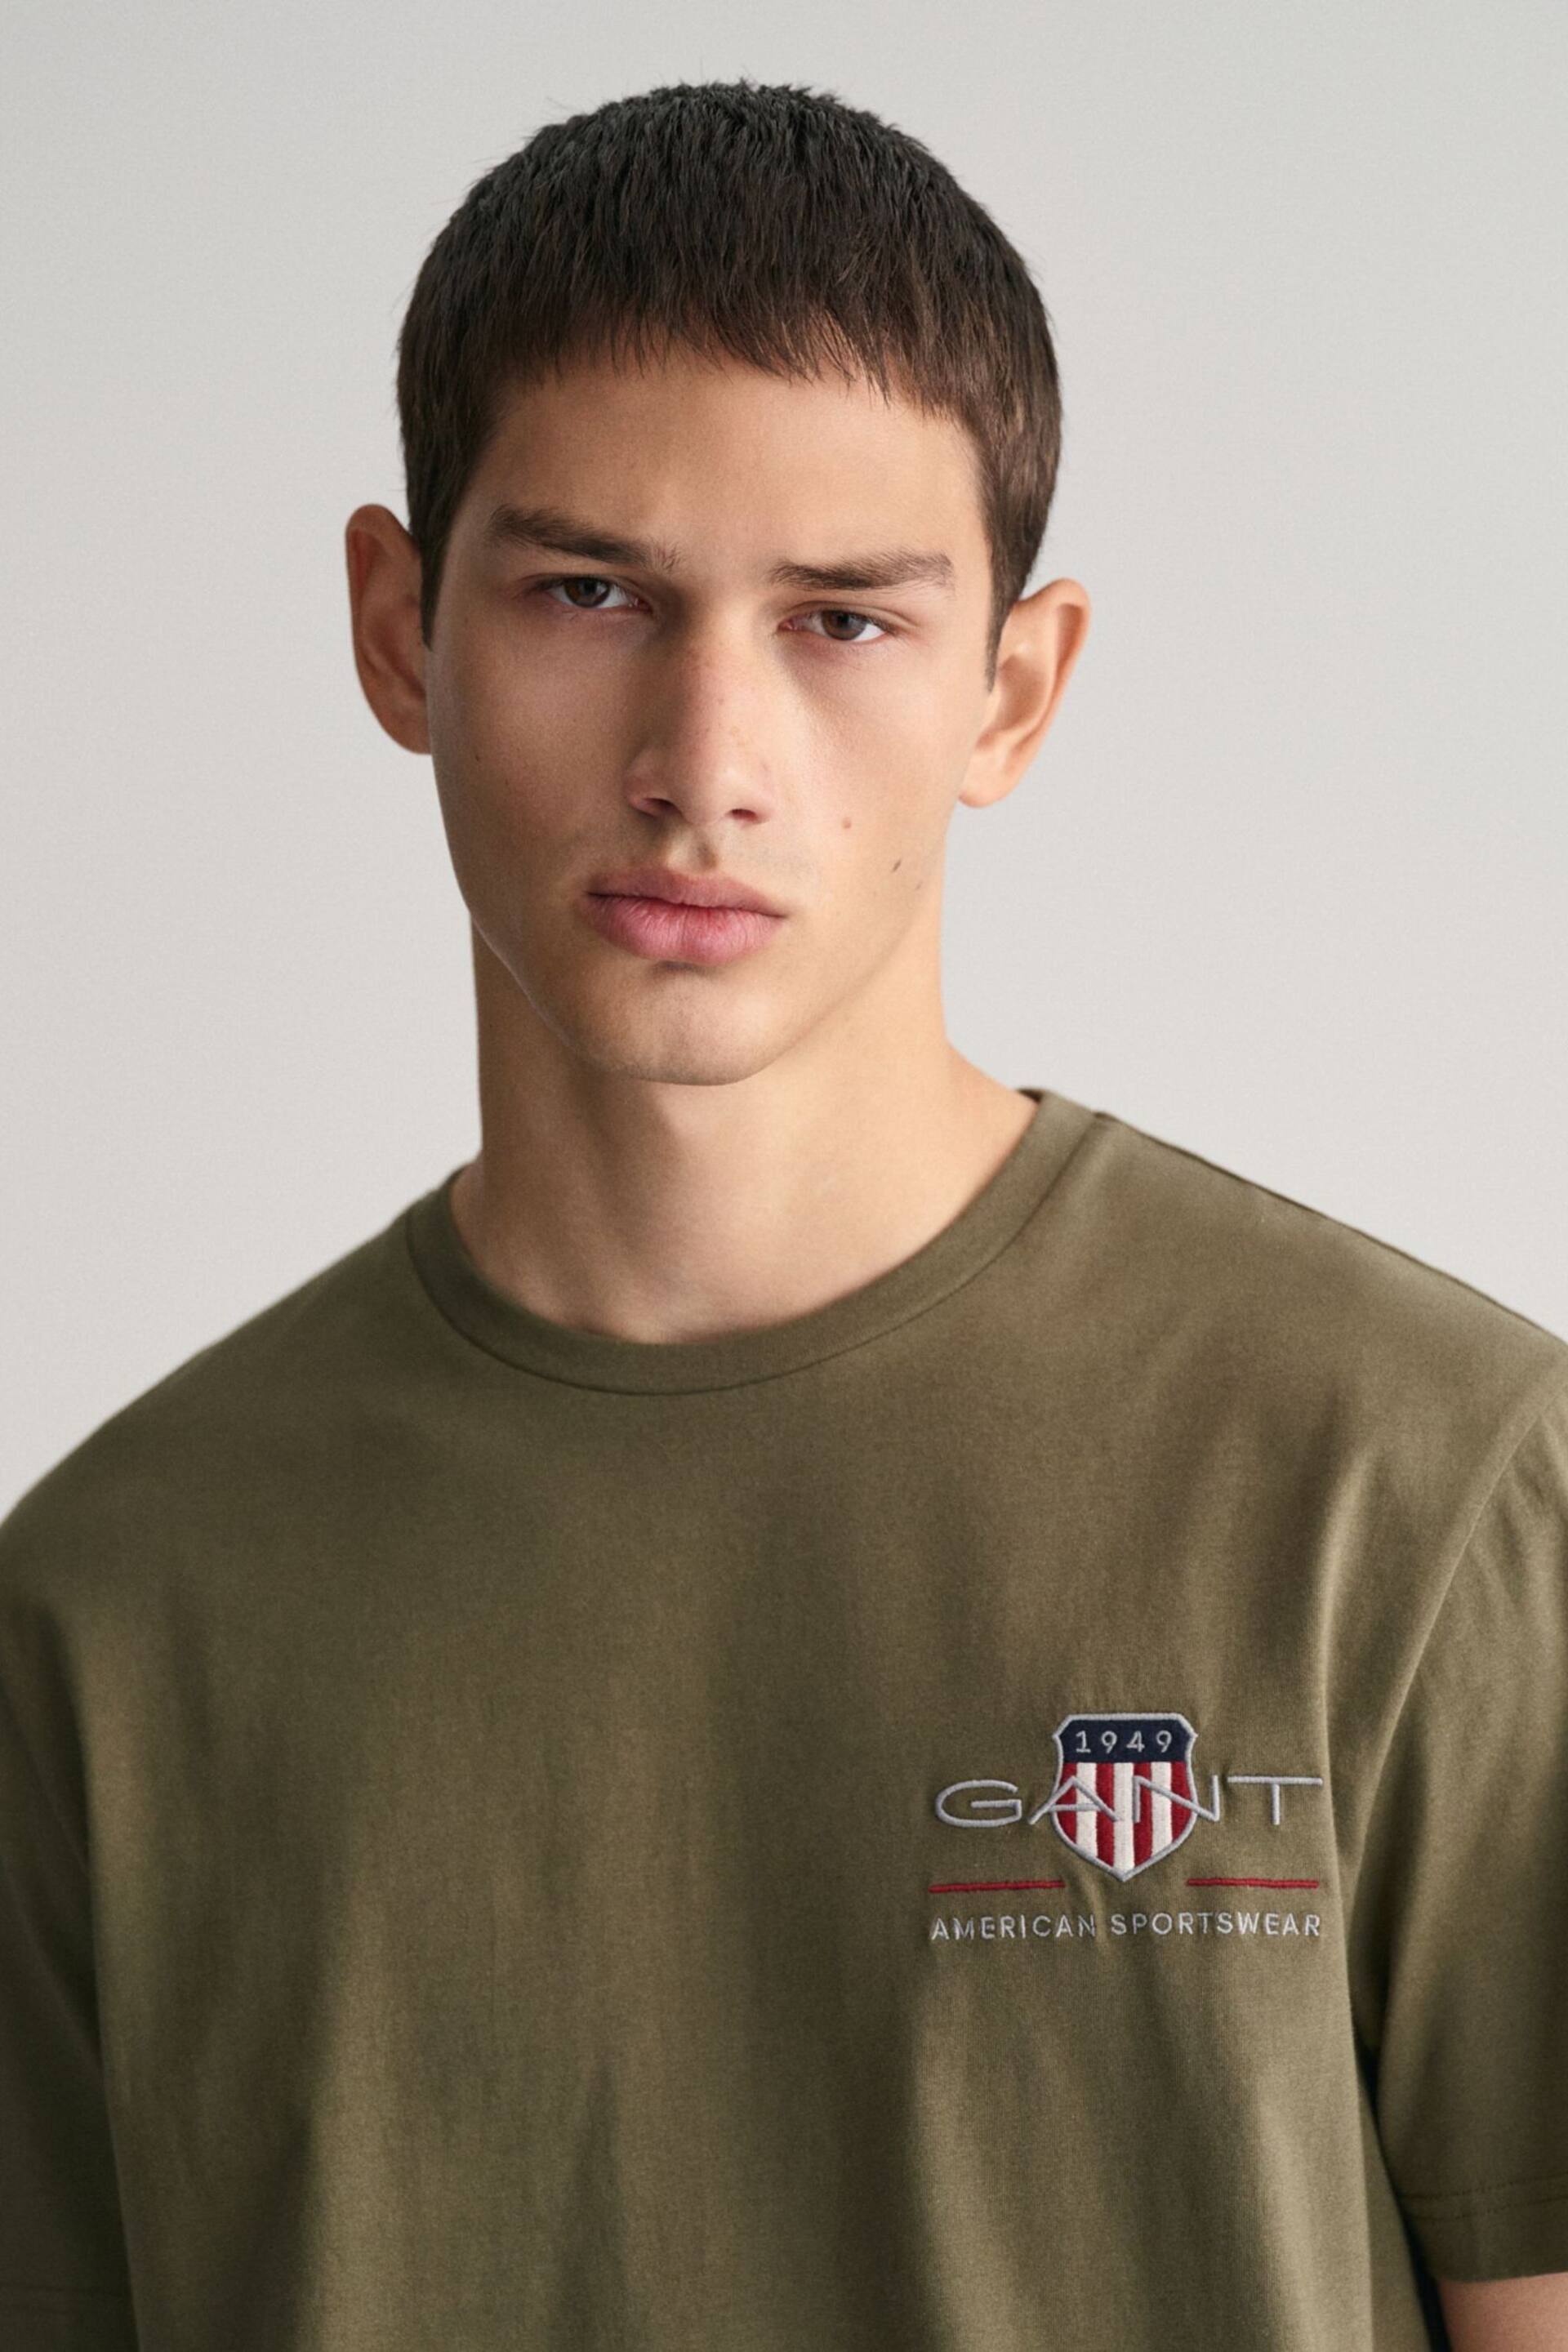 GANT Embroidered Archive Shield T-Shirt - Image 4 of 5